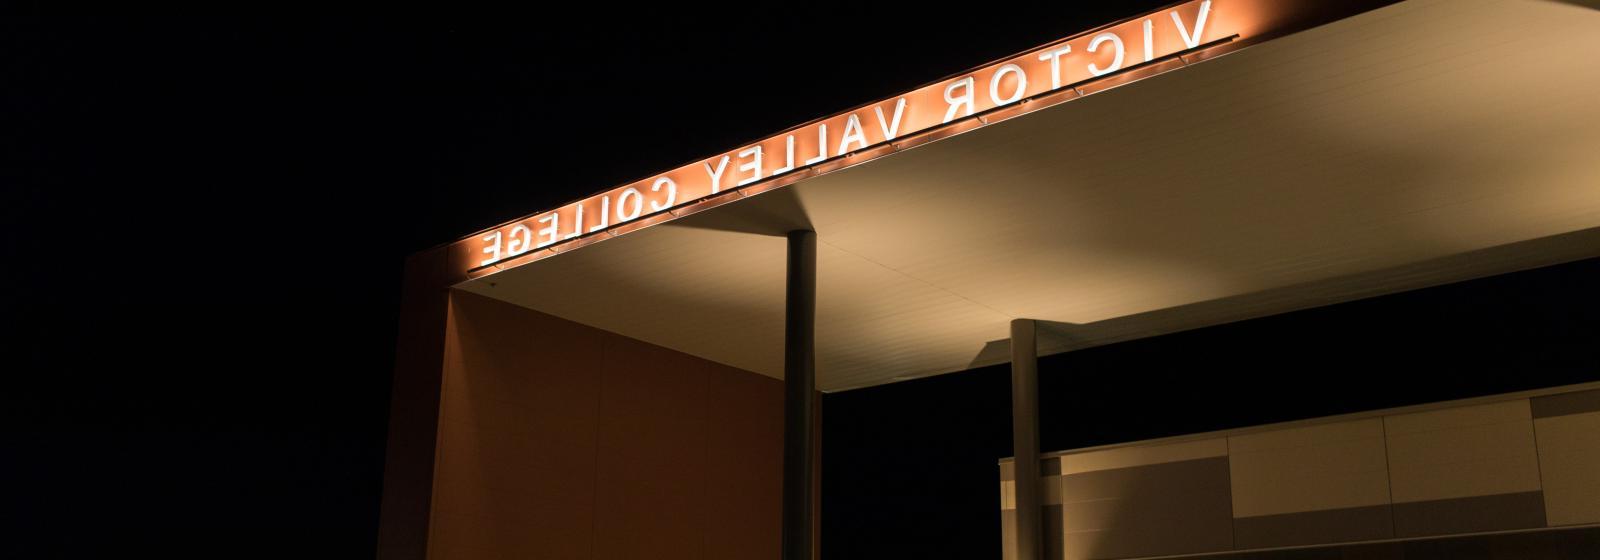 Image of Victor Valley College building at night.